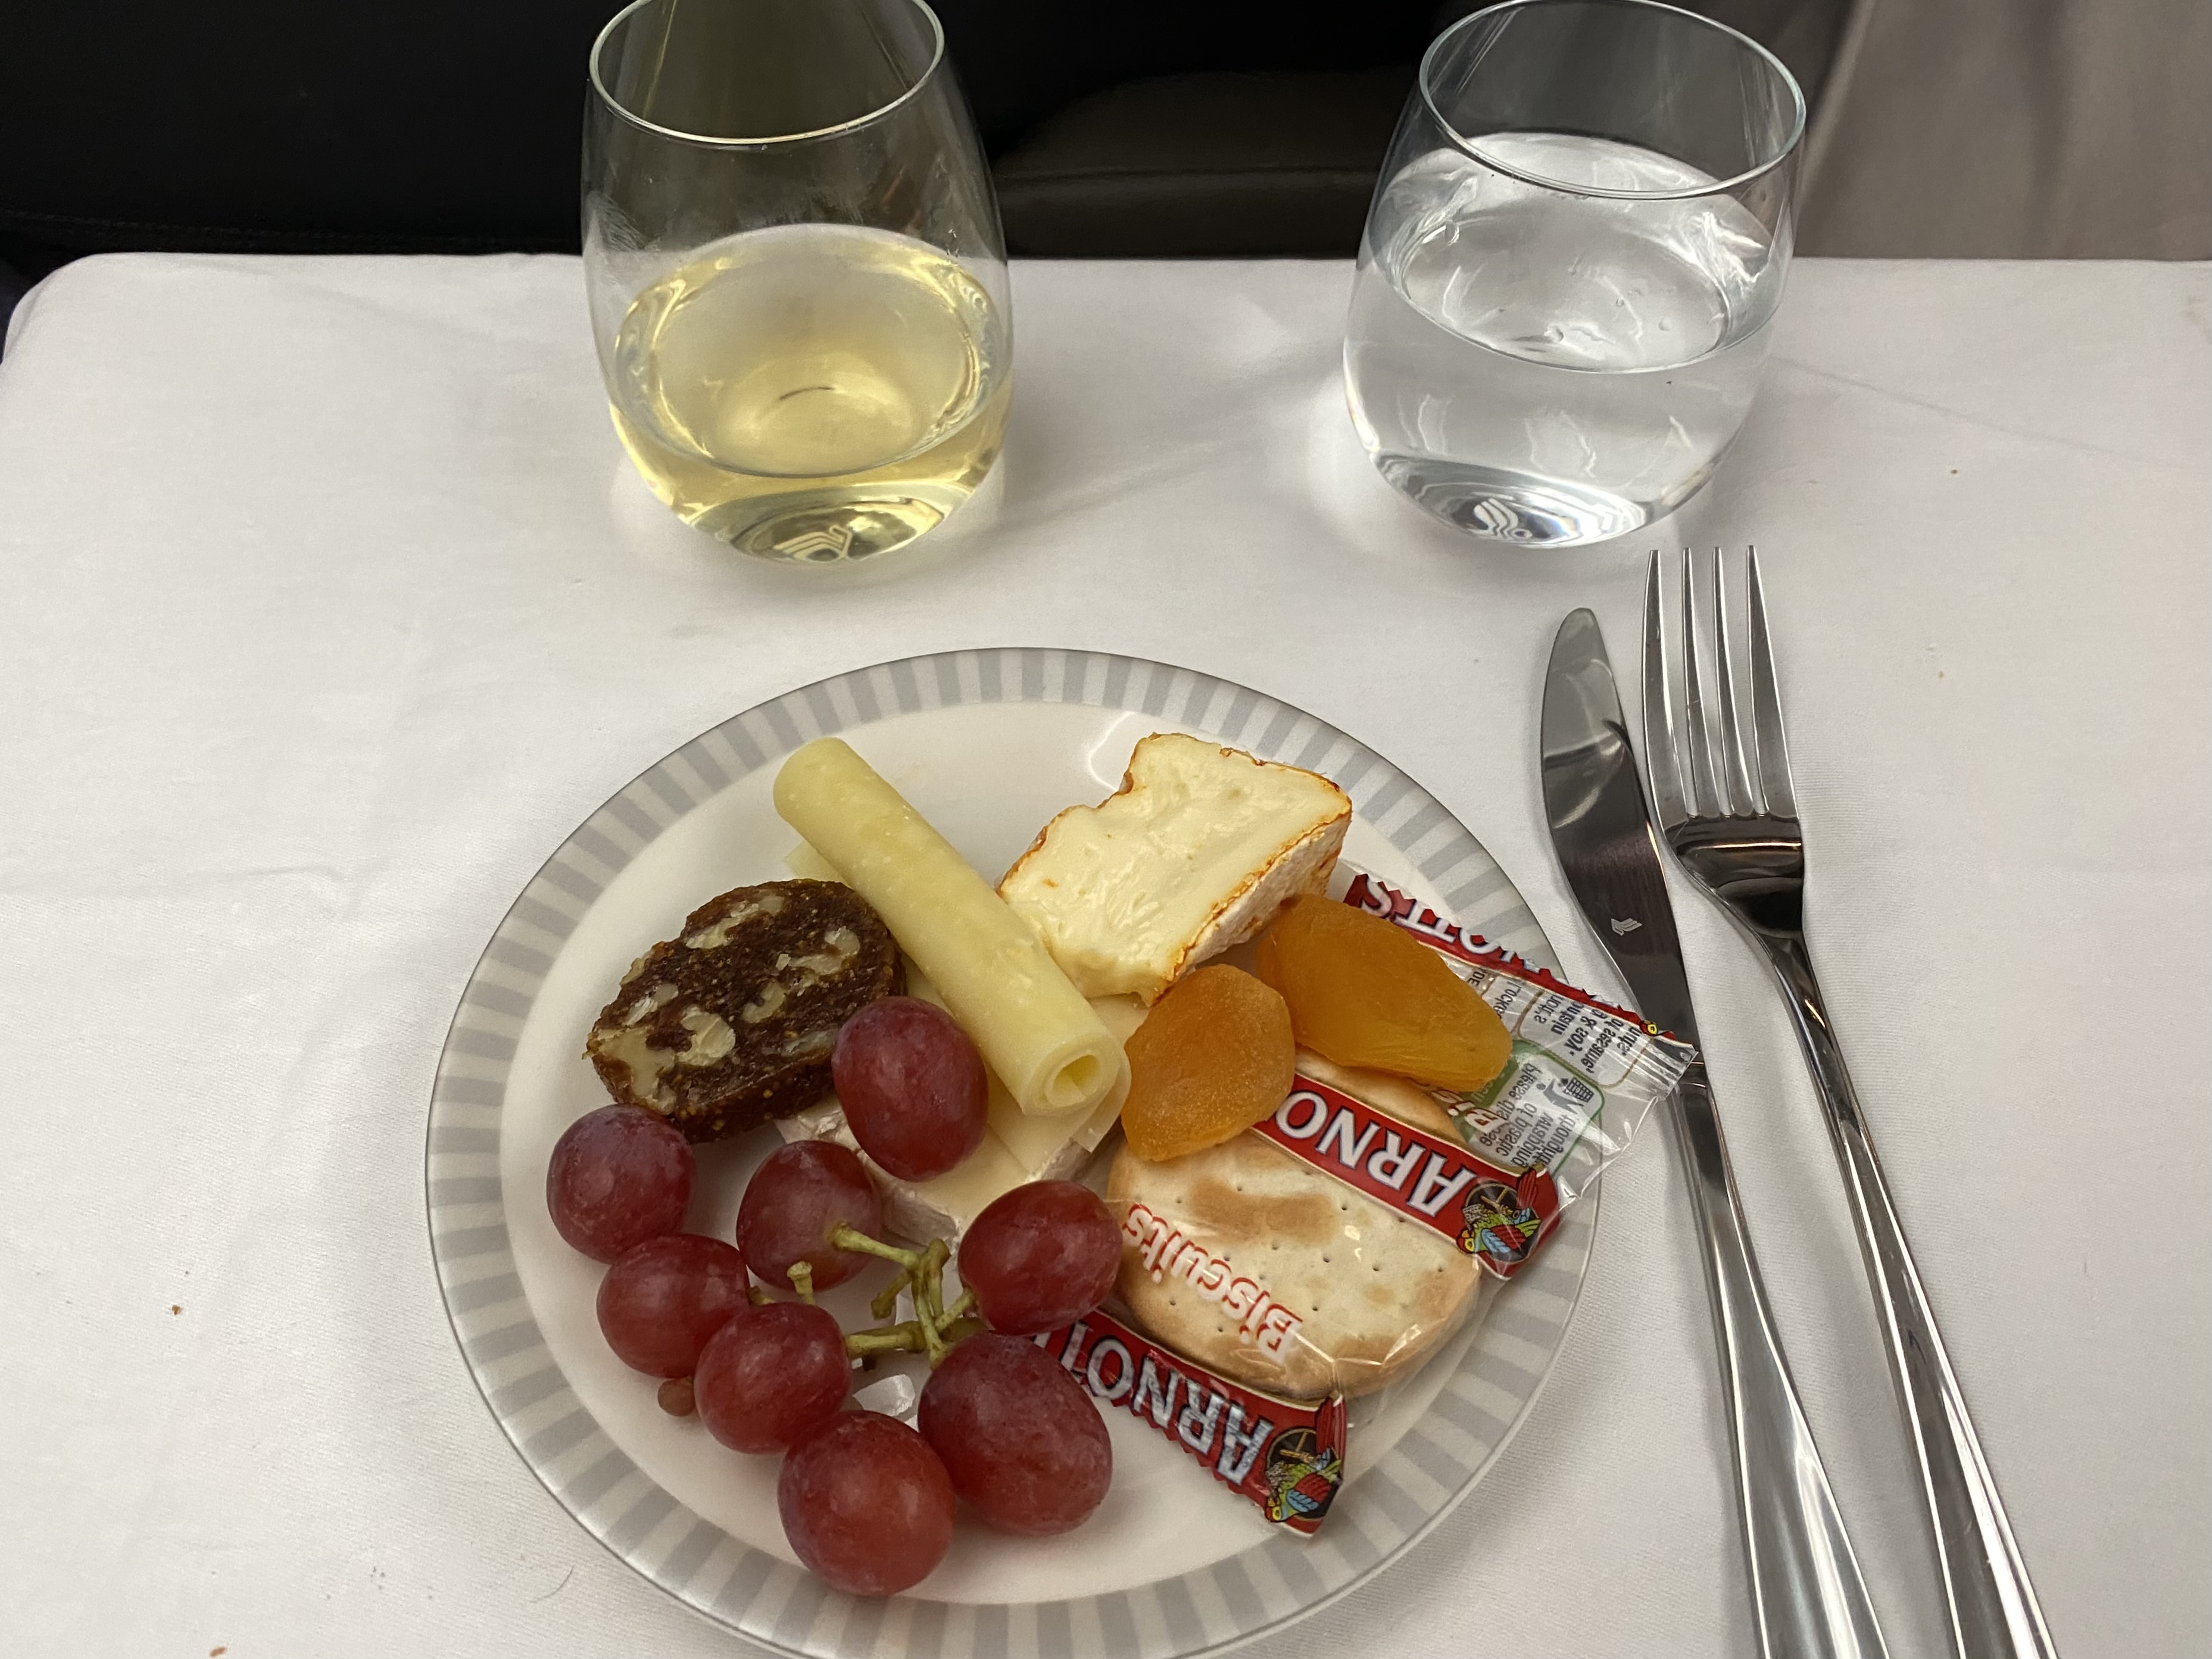 a plate of food and wine on a table